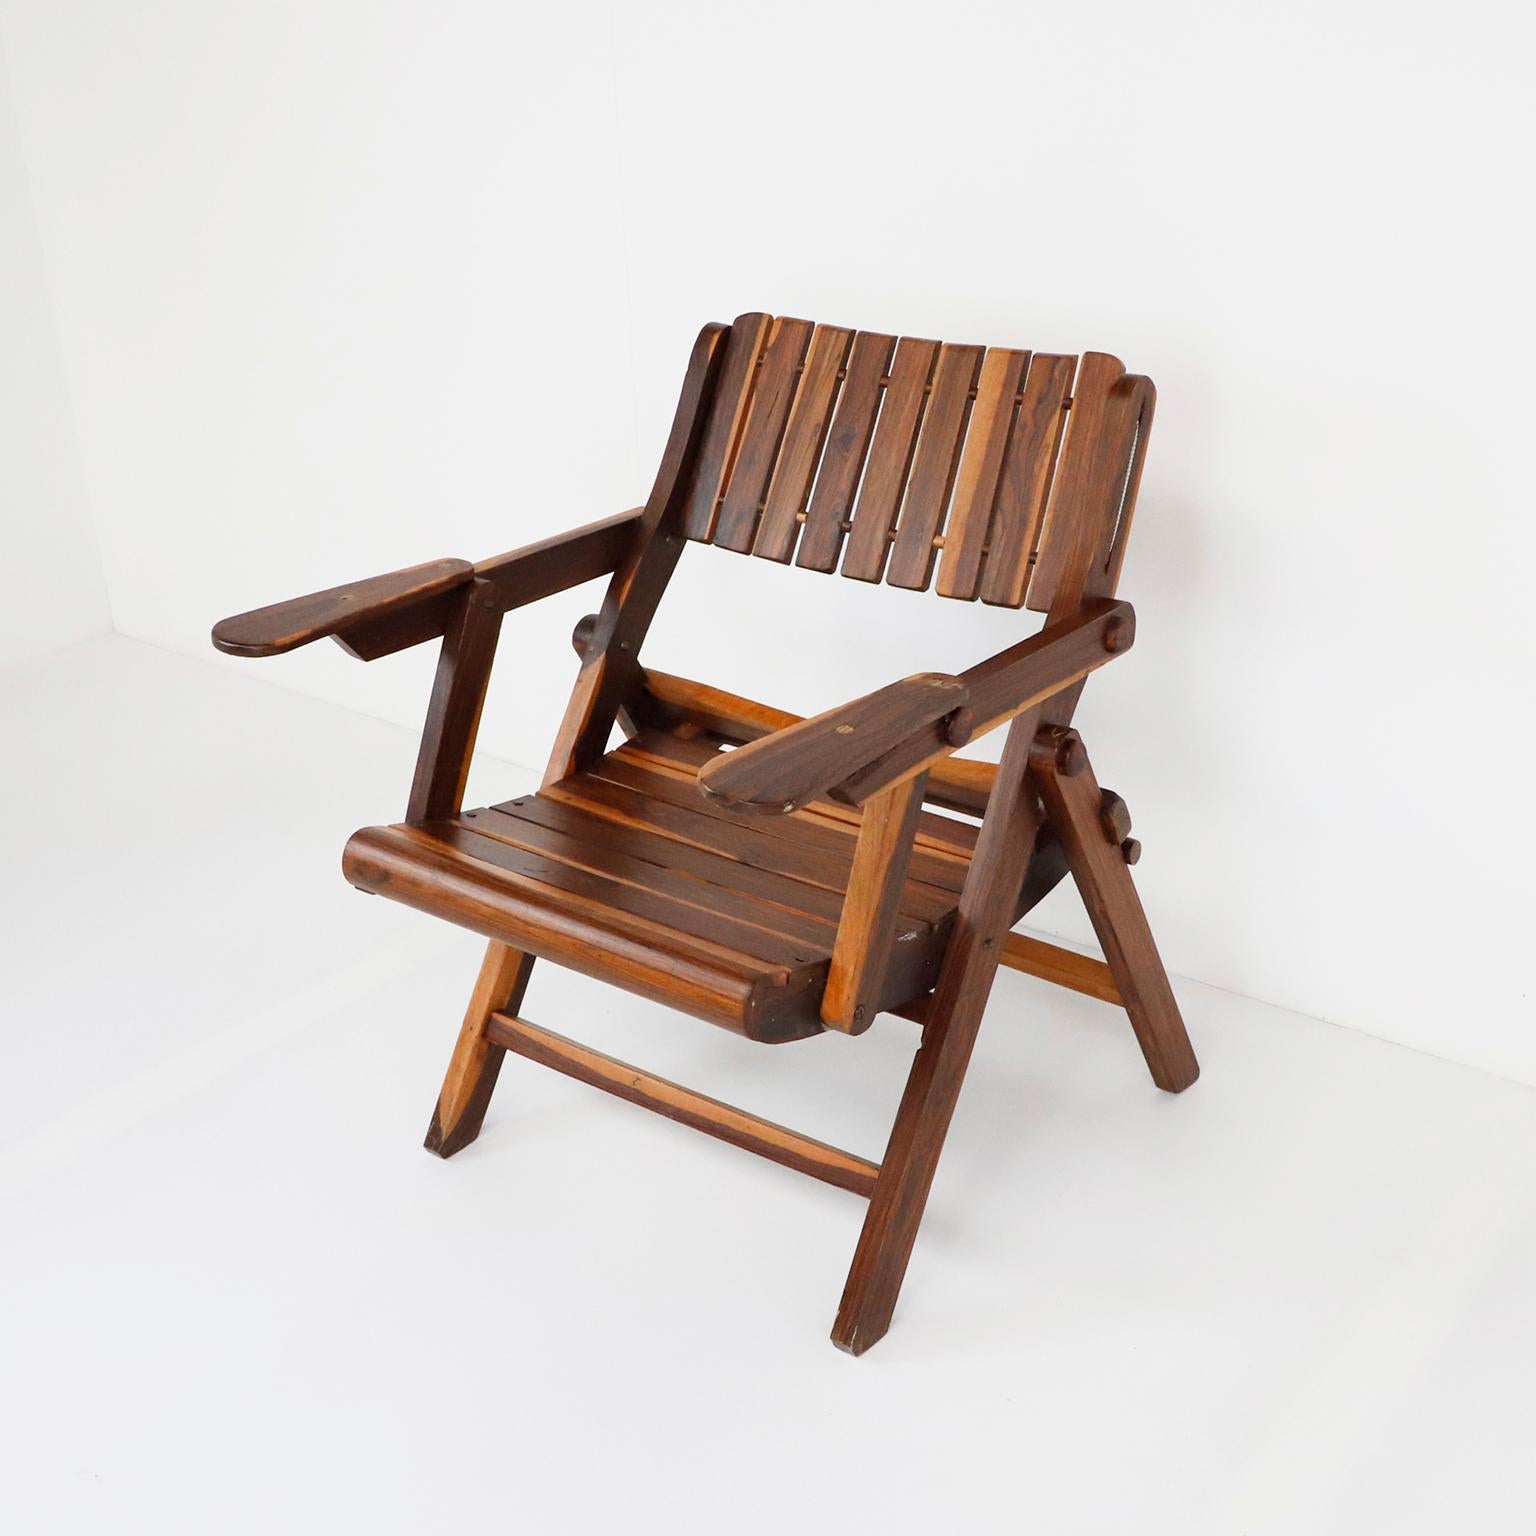 Circa 1970. We offer this antique Mexican folding armchair made in solid Cocobolo wood.